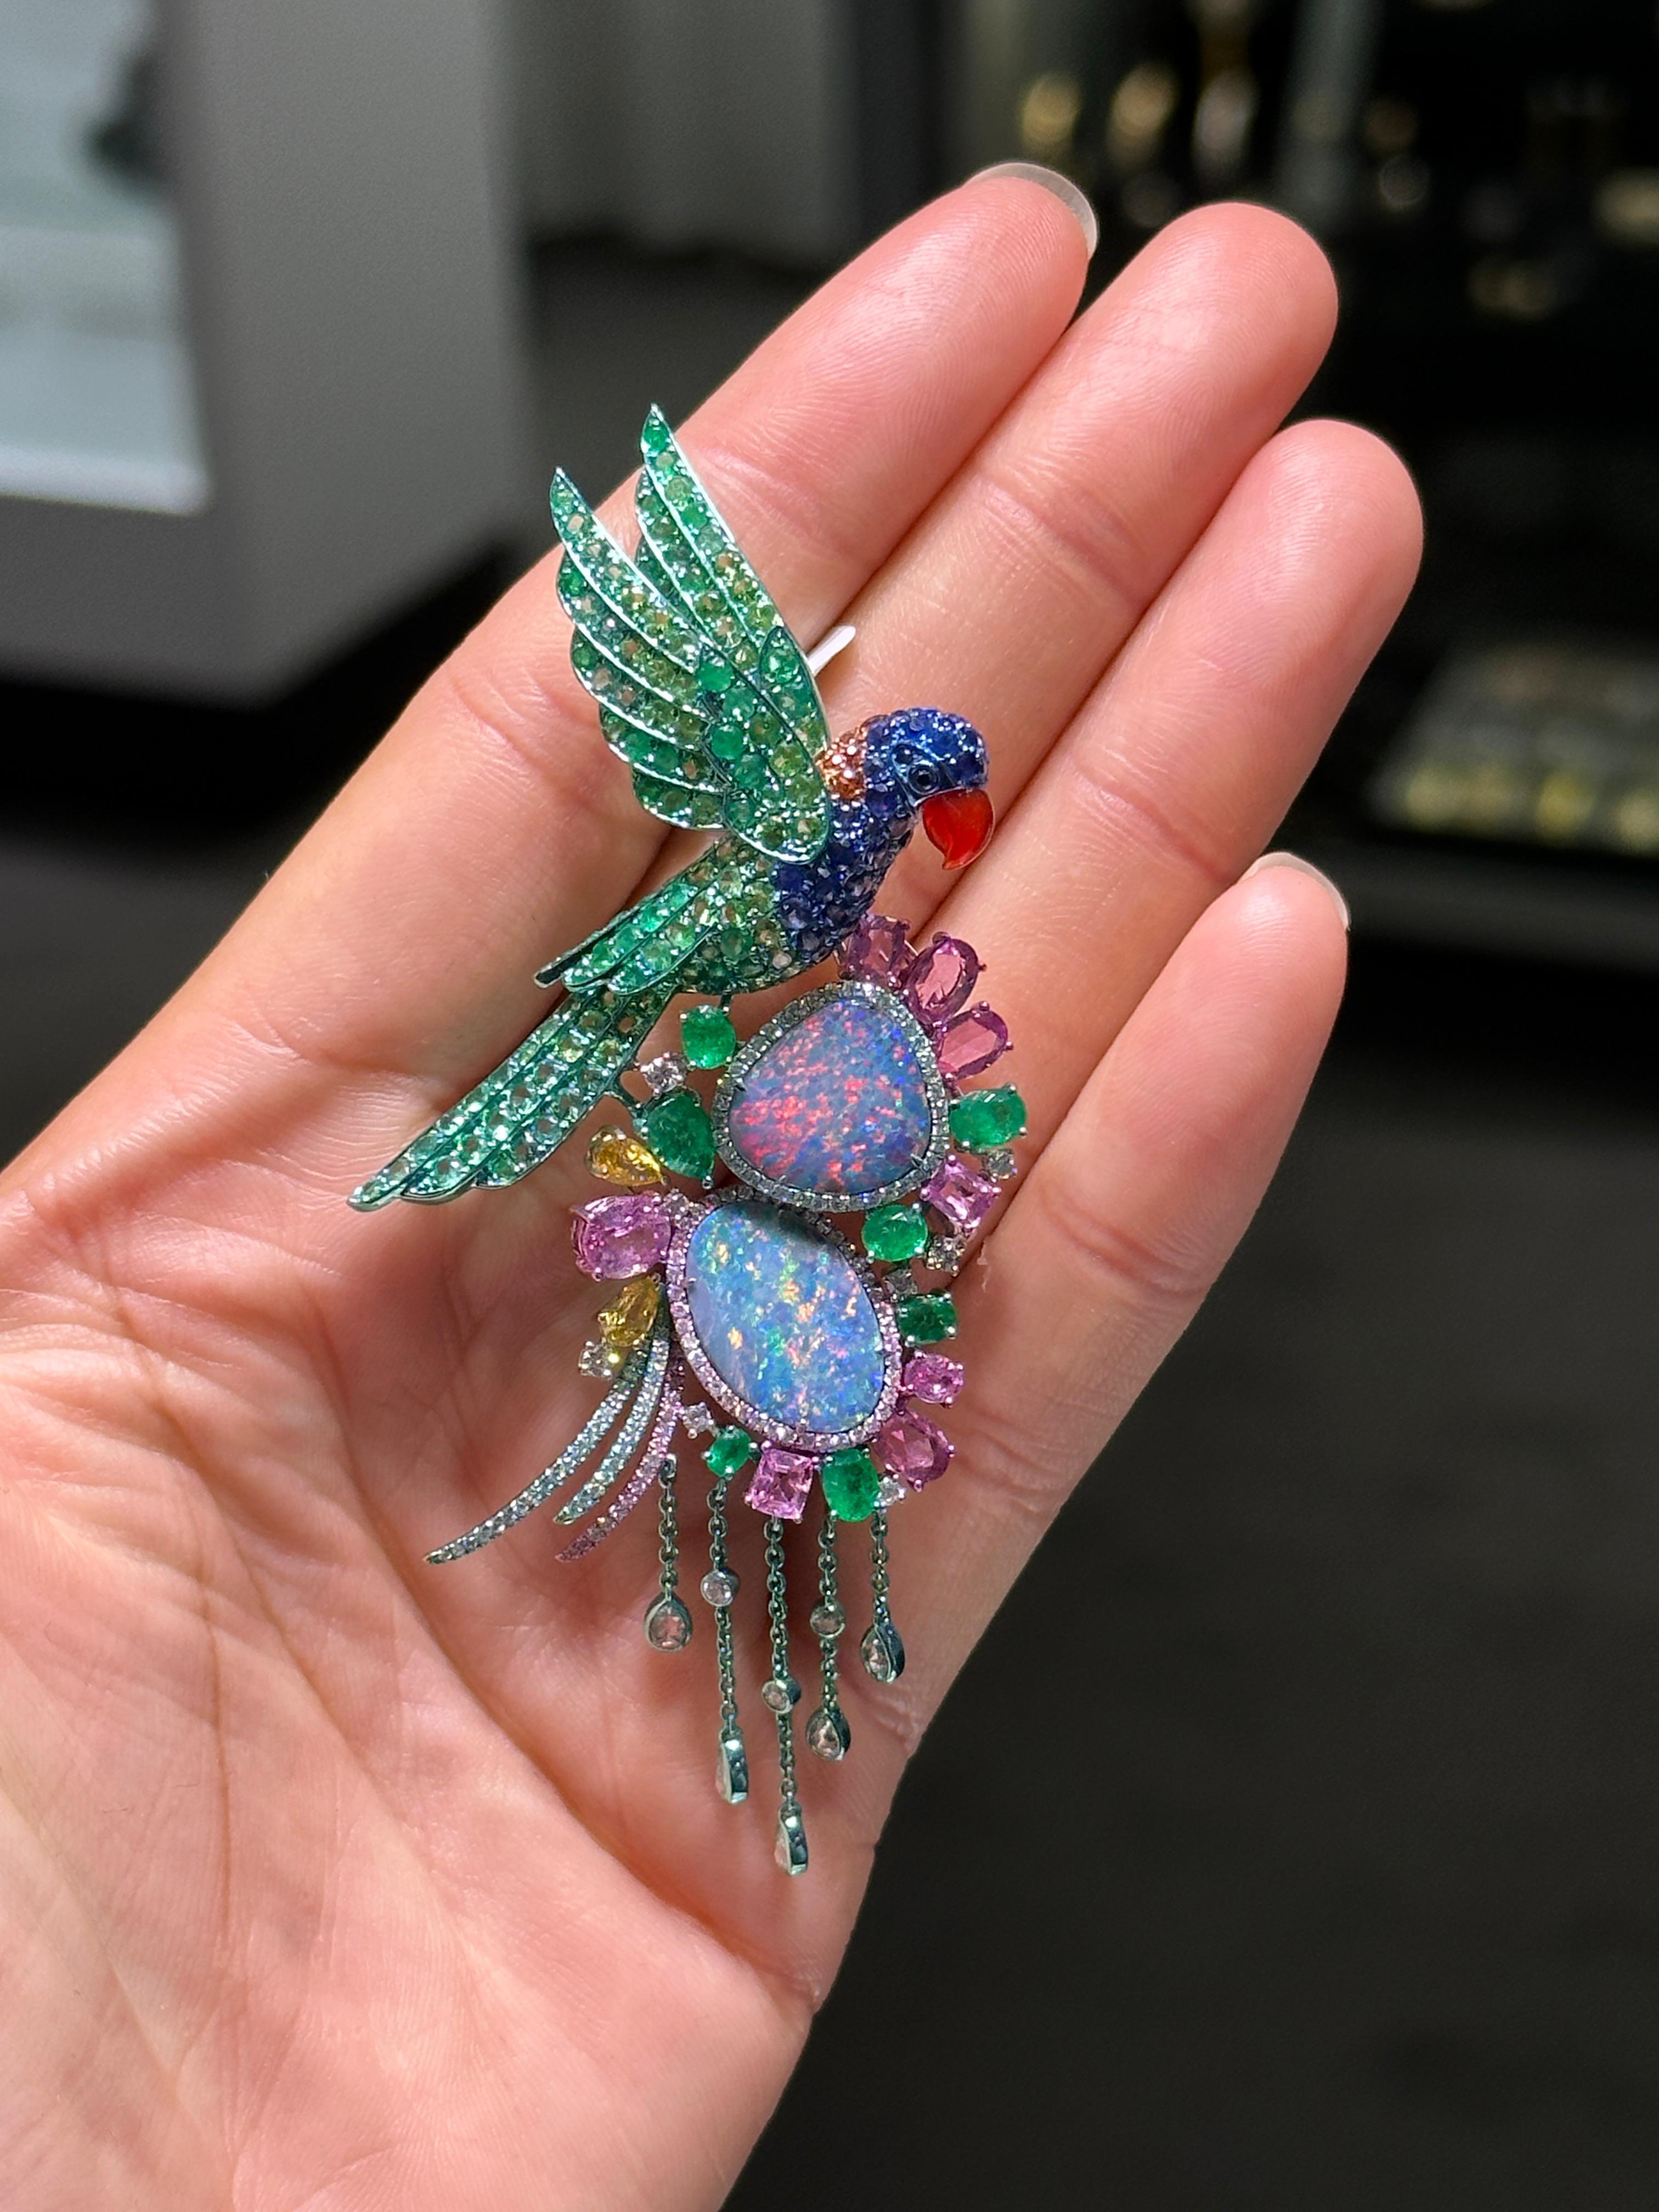 The Following Item we are offering is a Rare Important Radiant Back Opal Sapphire and Diamond Parrot Brooch Pin Pendant. This Rare Piece Magnificent Rare Multi Colored Sapphires, Fancy Black Opals, Emeralds and Diamonds. Stones are Very Clean and